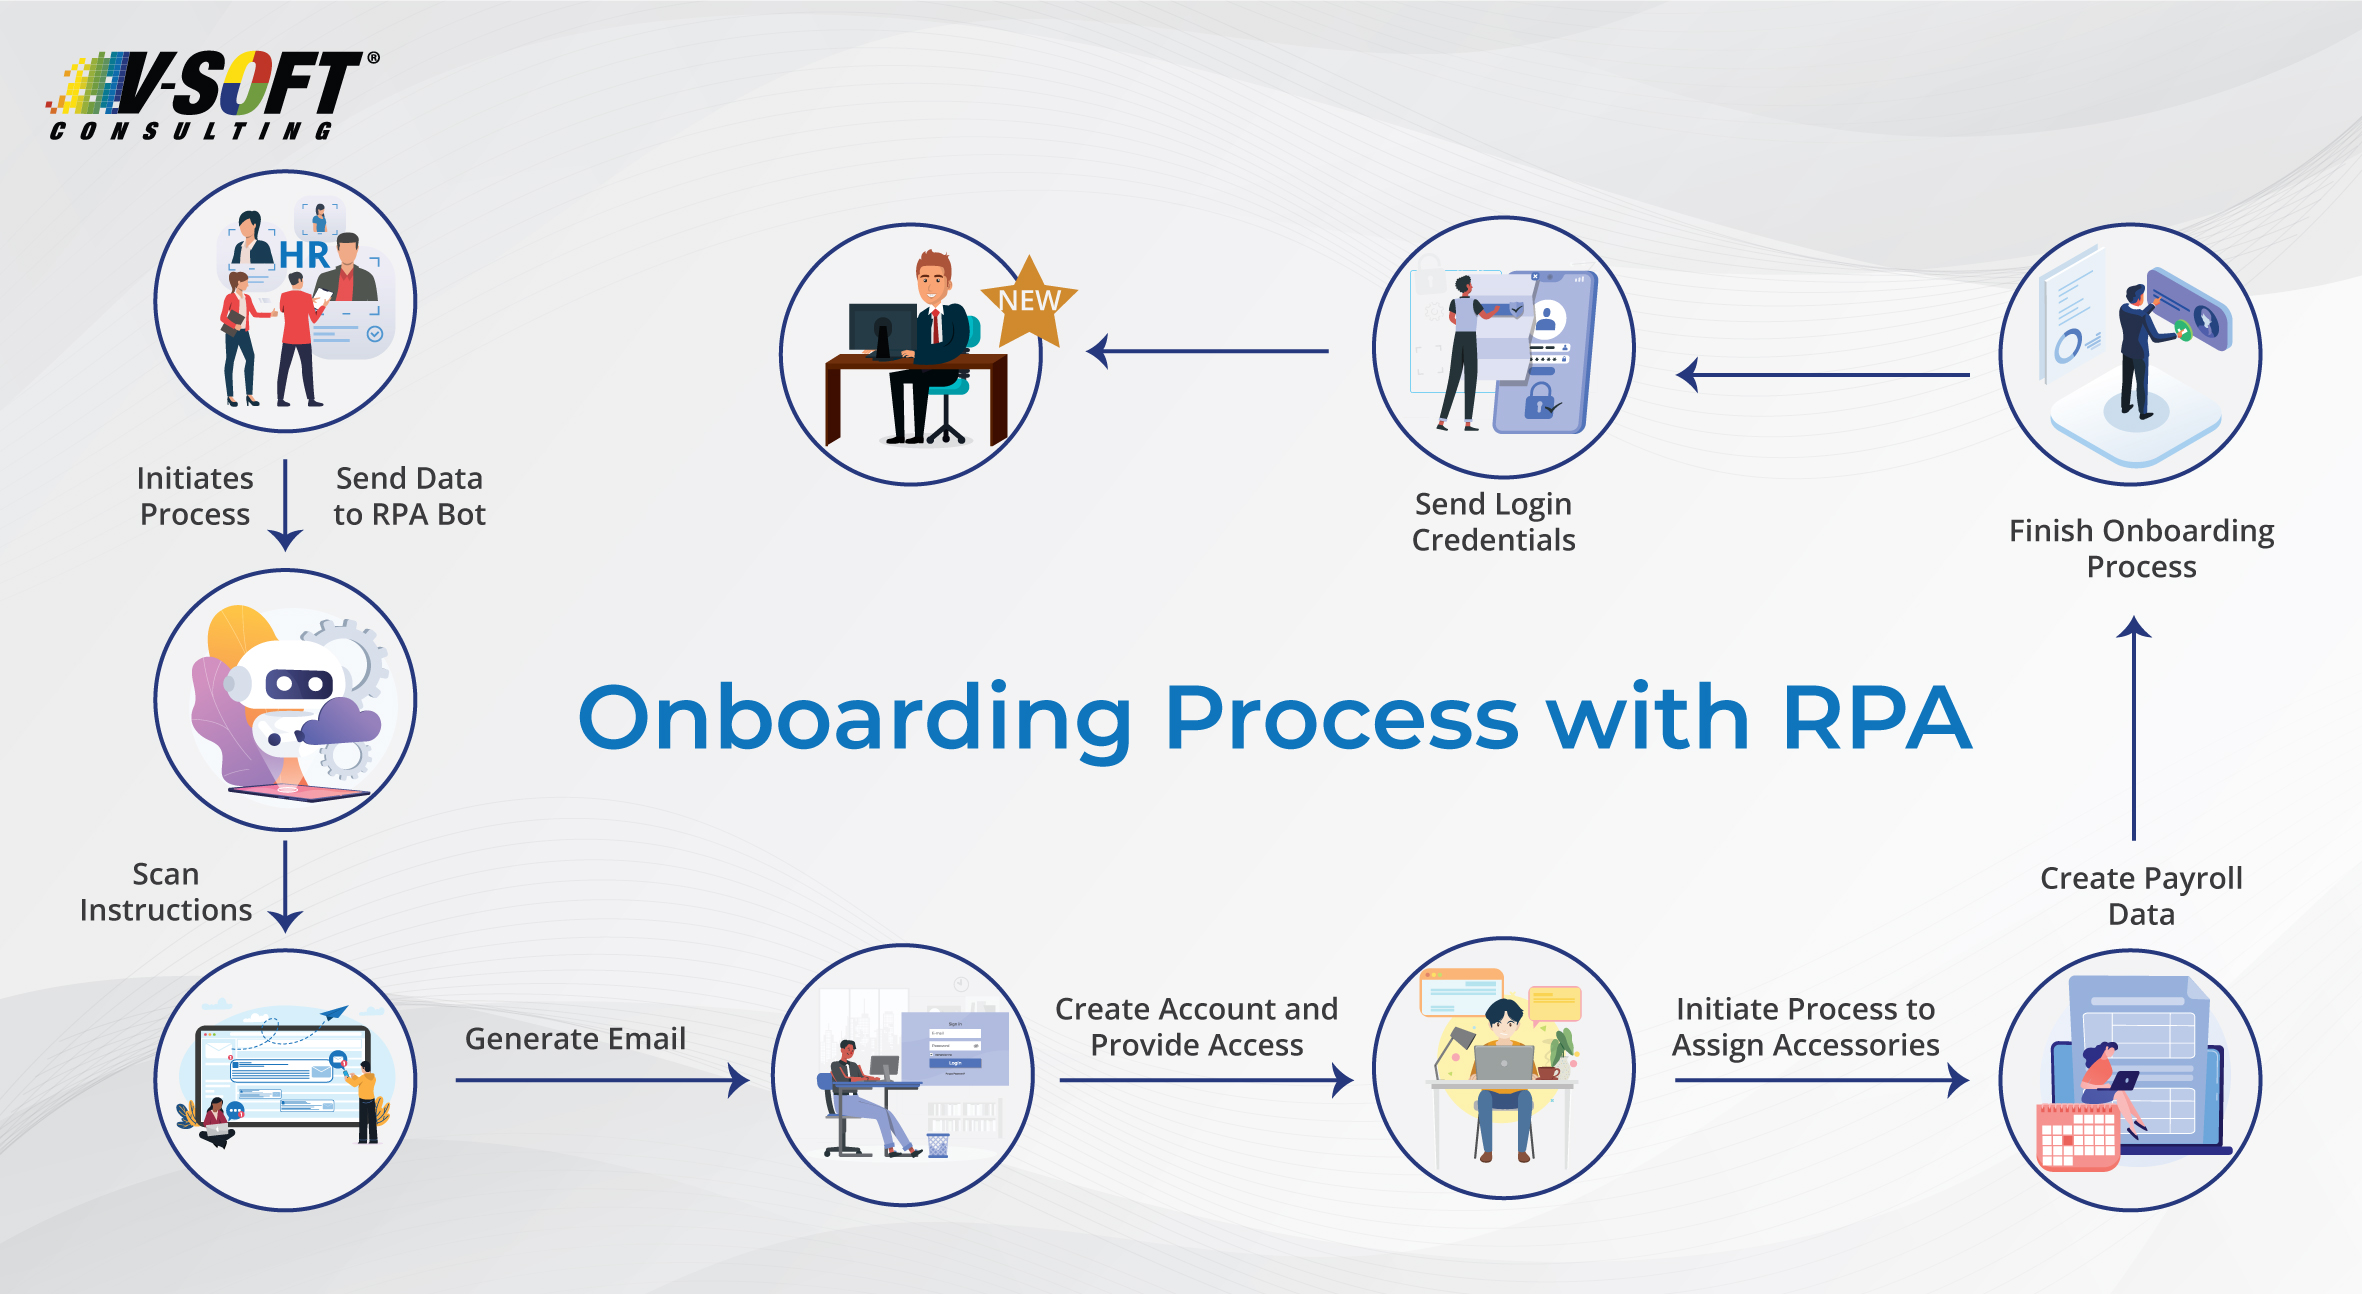 Onboarding with RPA